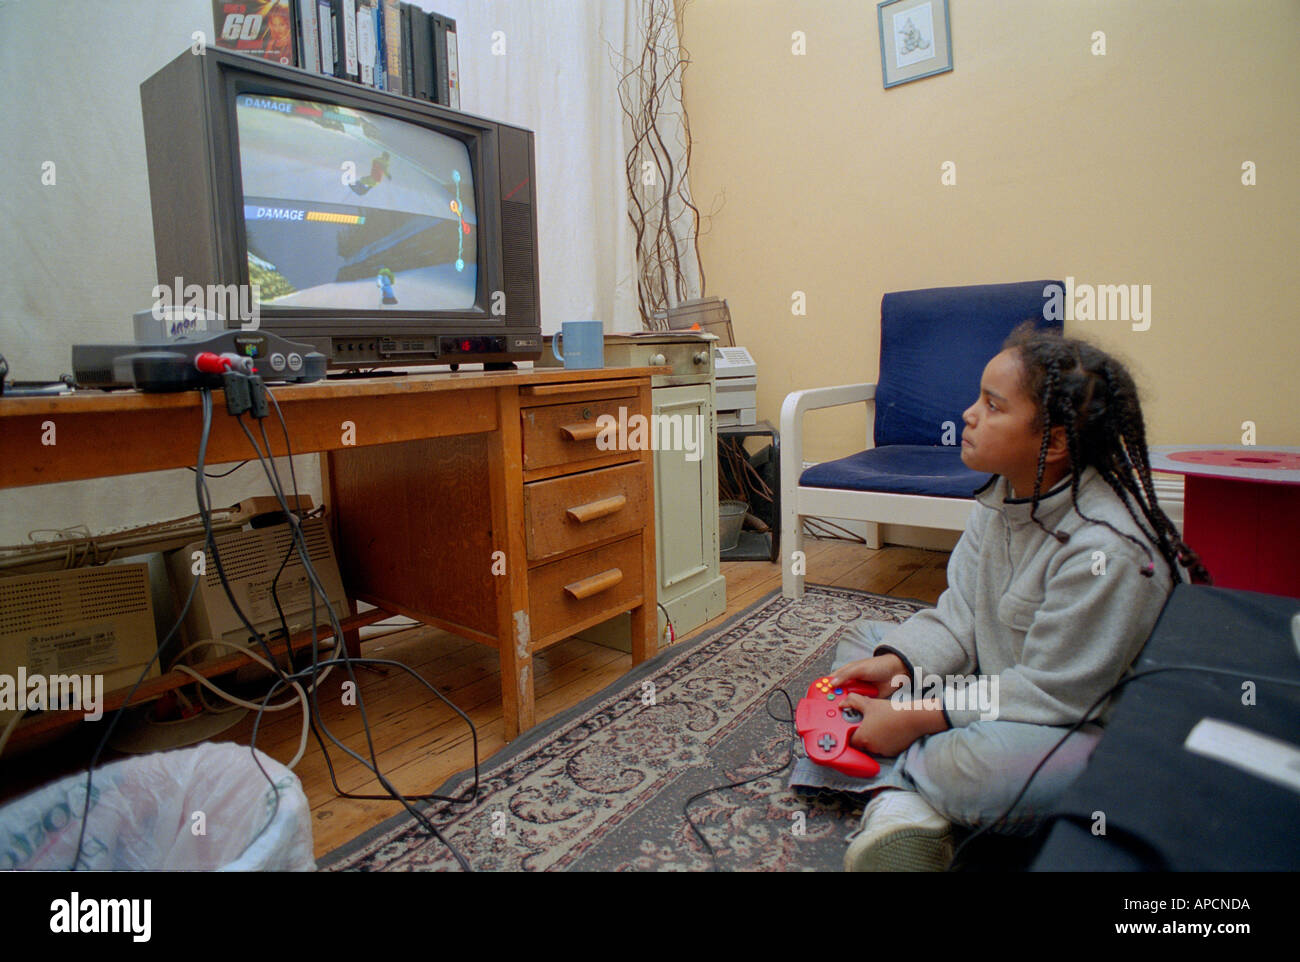 Young children playing on playstation at home. Stock Photo